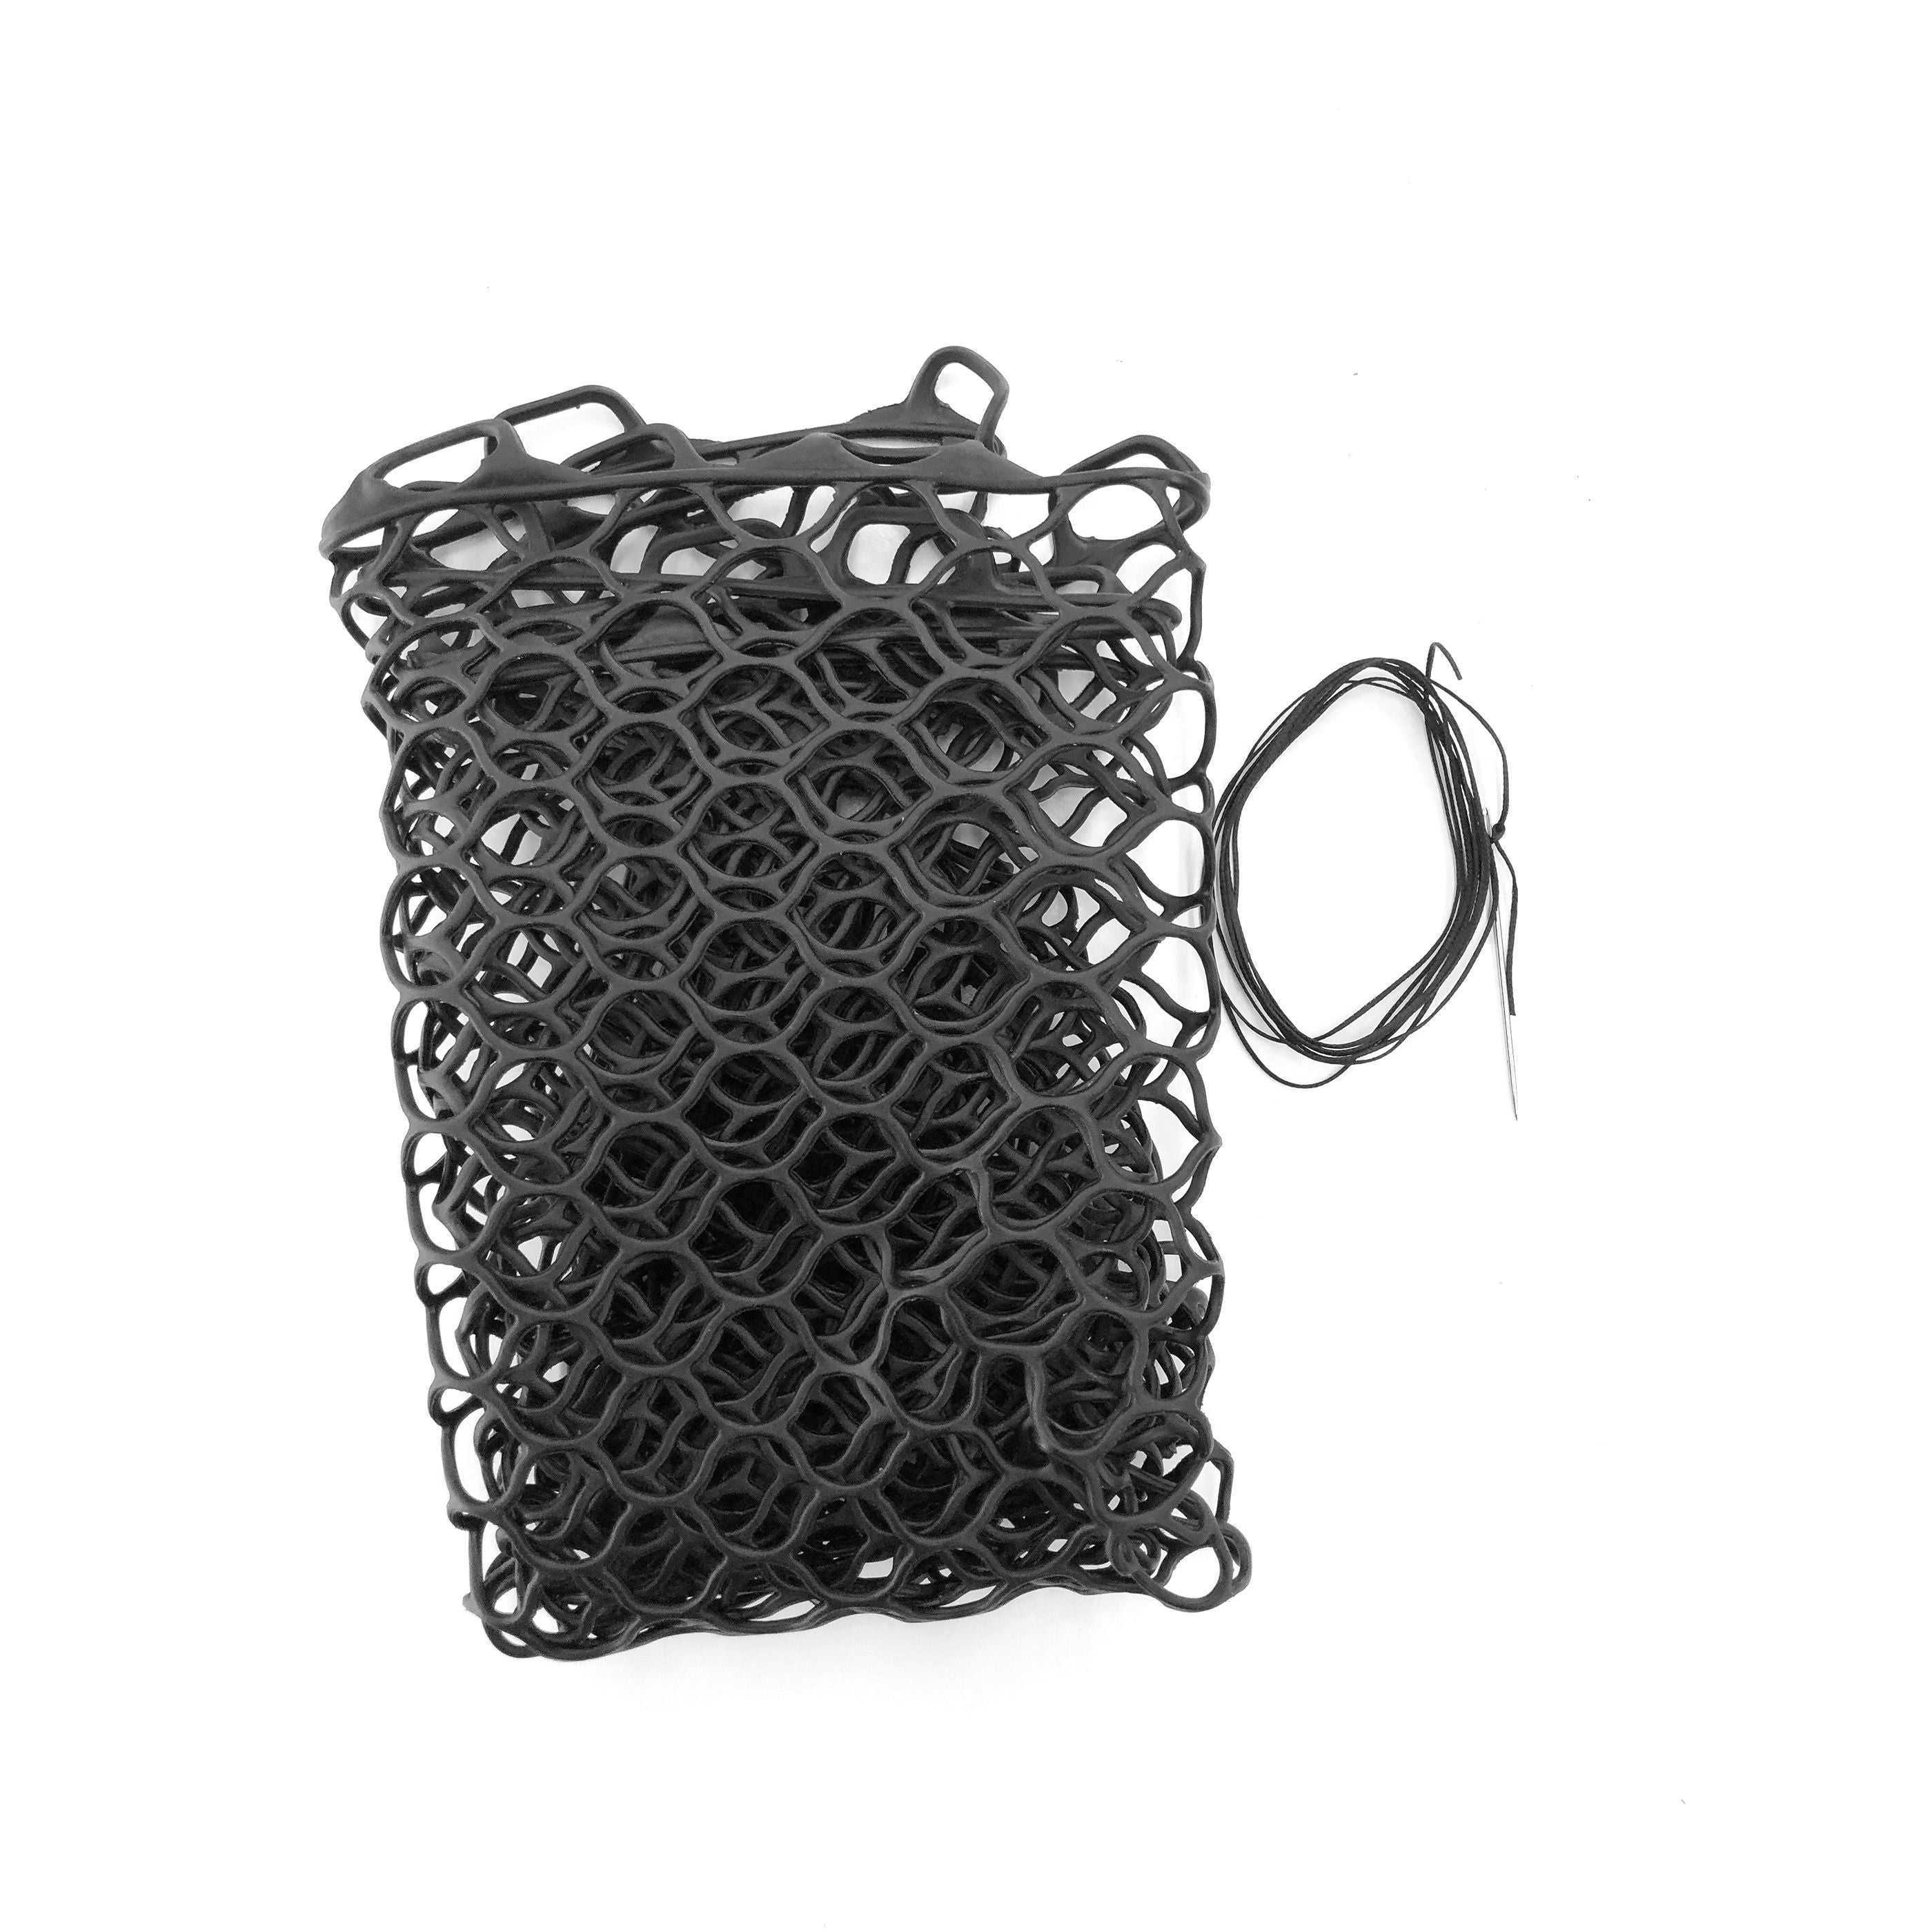 Fishpond Nomad Replacement Rubber Net - Black - 15 in